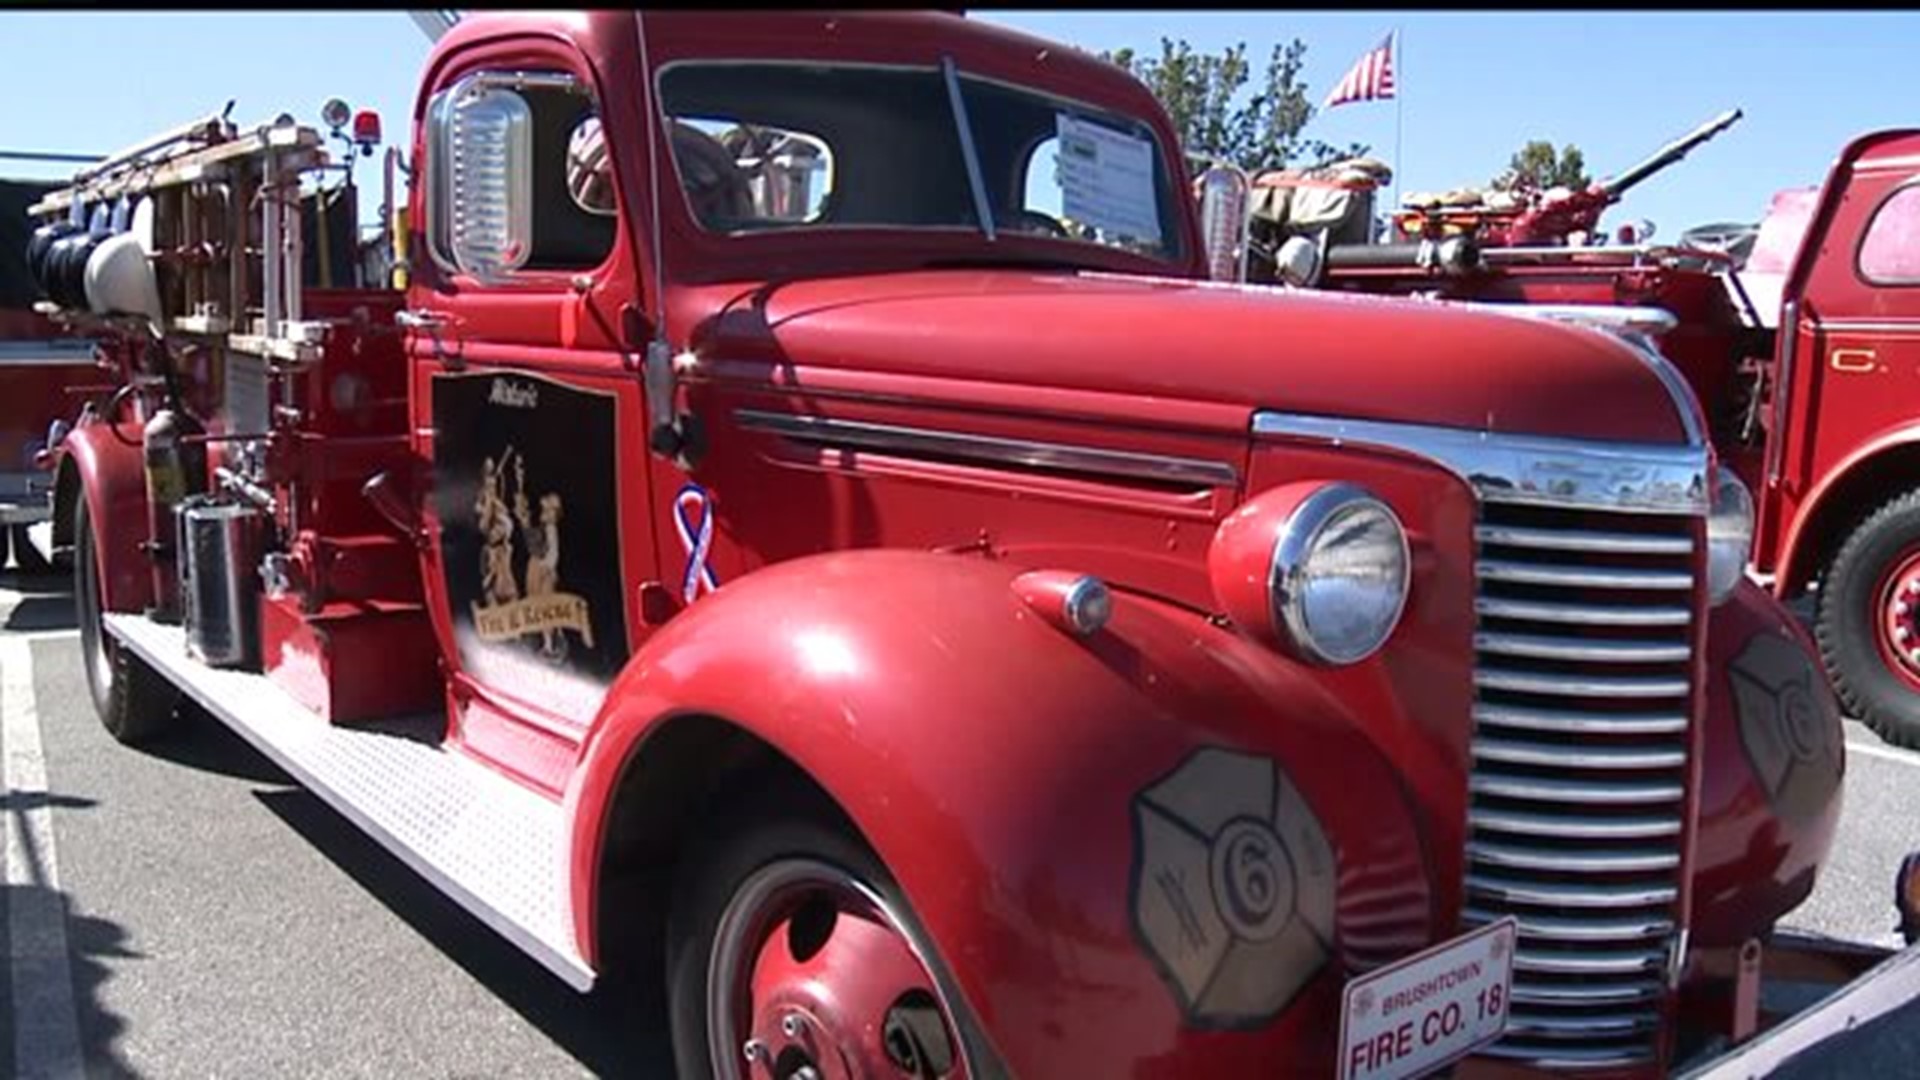 Folks in York County support local firefighters